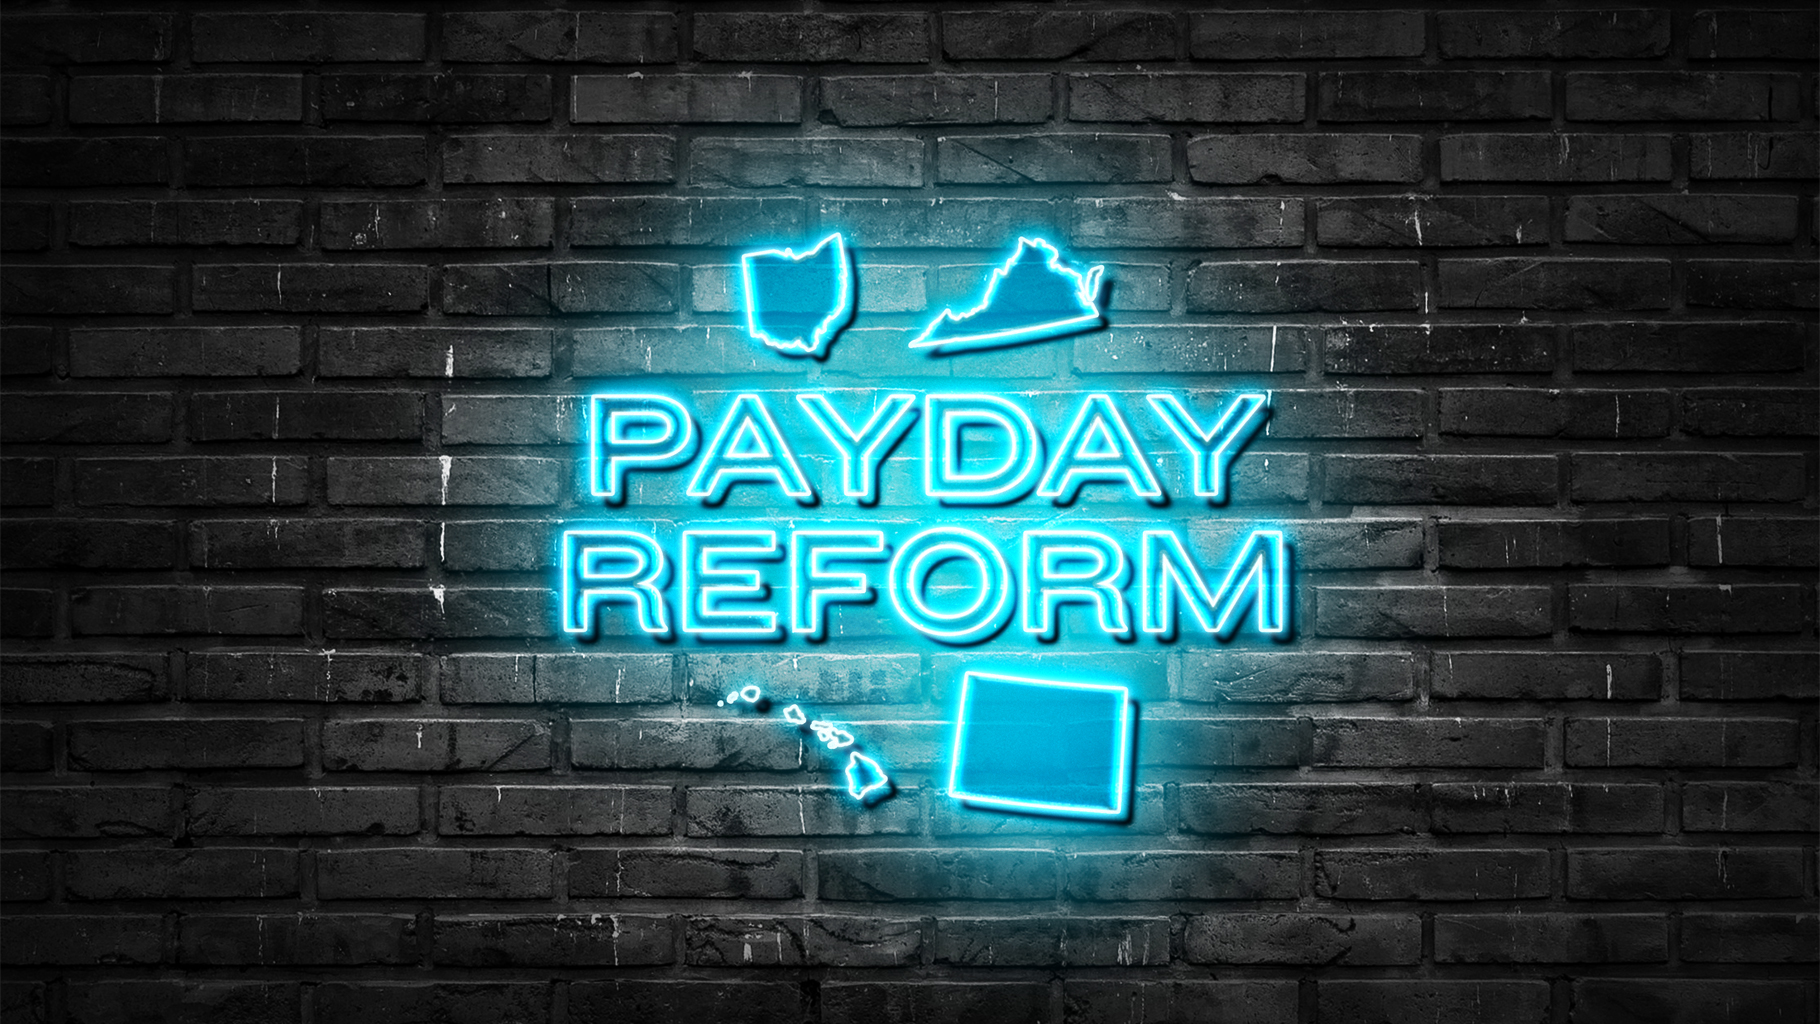 A neon payday reform sign with the outlines of states surrounding the lettering all hanging on a brick wall. 